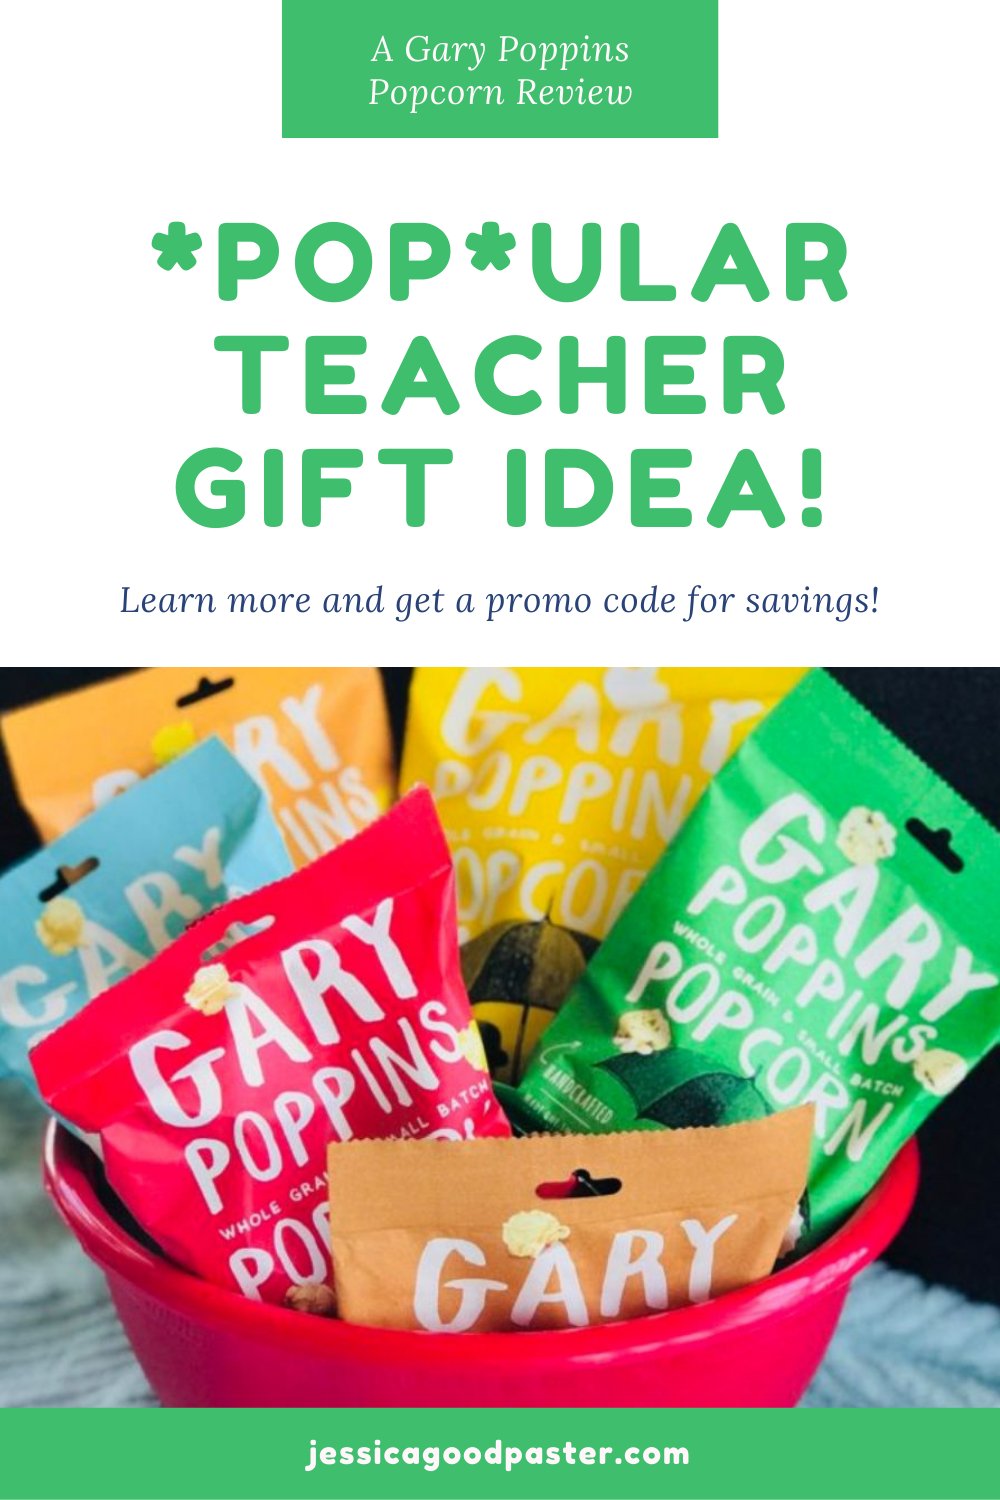 Make a *Pop*ular Teacher Gift with Gary Poppins Popcorn | Learn all about this handcrafted gourmet popcorn in my Gary Poppins review. Find unique sweet and savory flavors made from yummy recipes and seasonings that are freshly popped and sent to your home. Bags and tins of multiple sizes make great teacher gifts, corporate gifts, wedding favors, stocking stuffers, or a perfect movie theater night at home! Plus, get a coupon code for a discount. #popcorn #gourmetpopcorn #snackideas #stockingstuffer #weddingfavor #giftbasket #teachergifts #giftideas